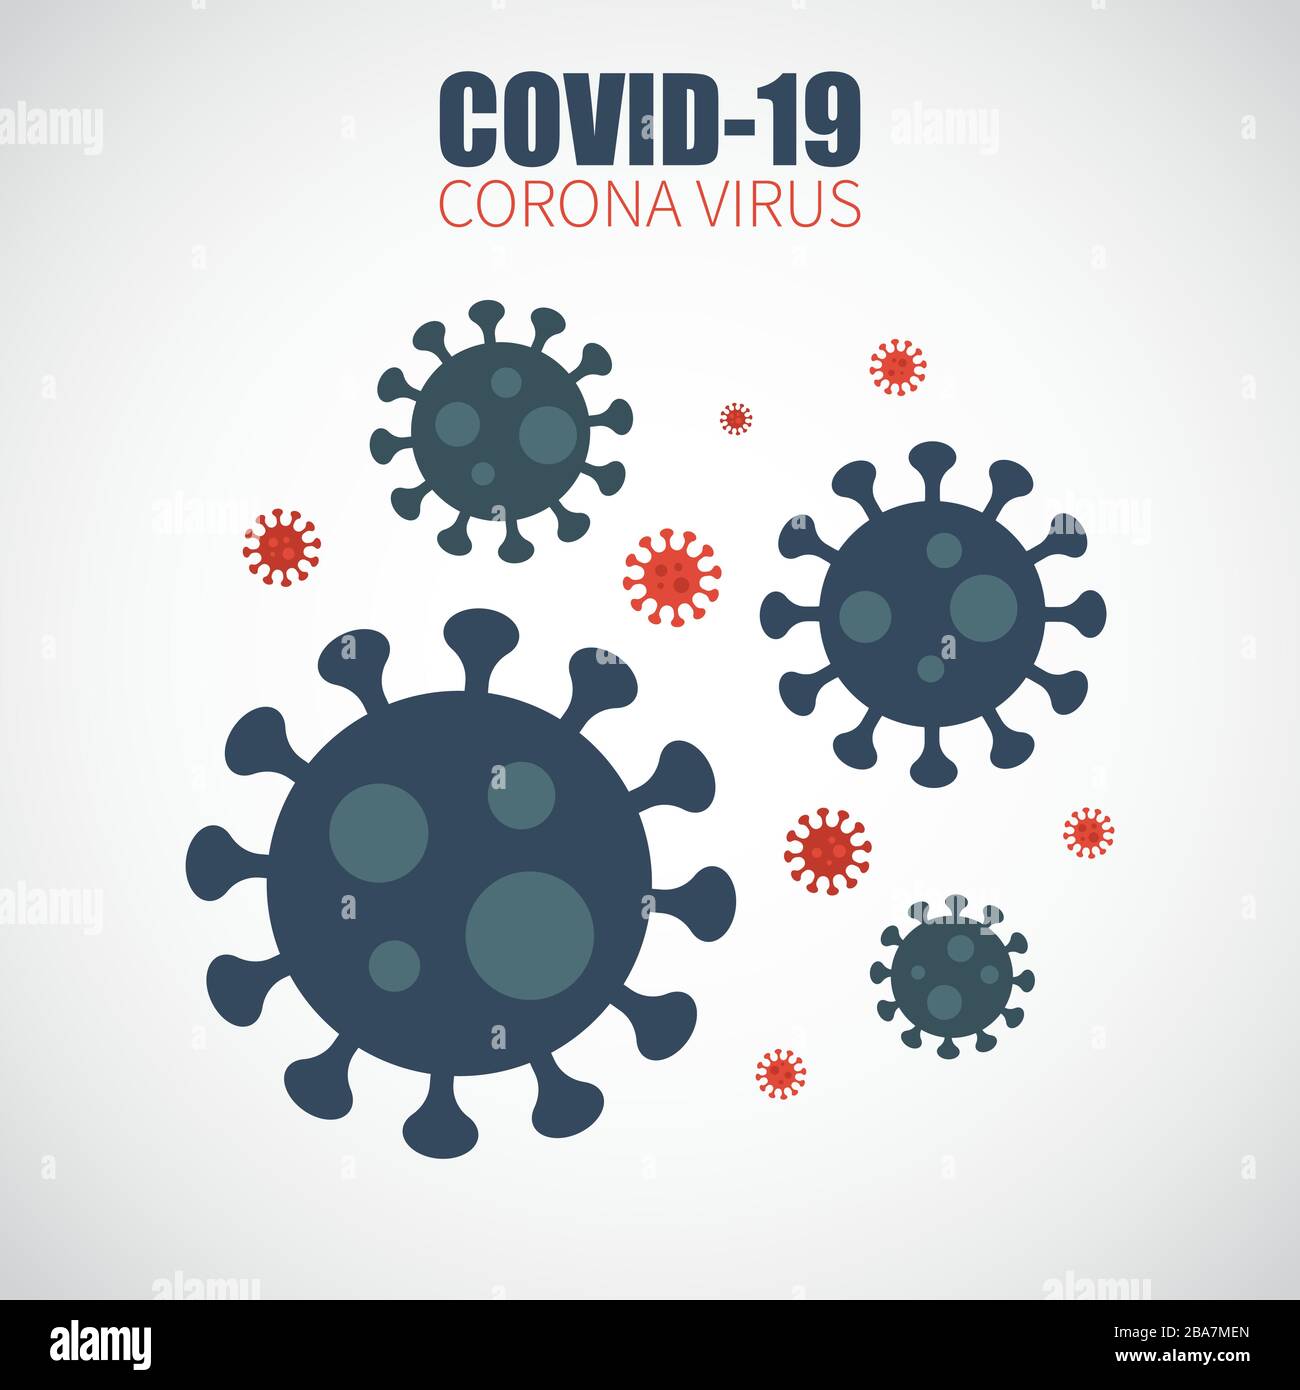 COVID-19 . Corona virus infected . Cause of SARS , MERS COV and COVID-19 in human . Flat and simple design . Gray color vignette background . Vector . Stock Vector